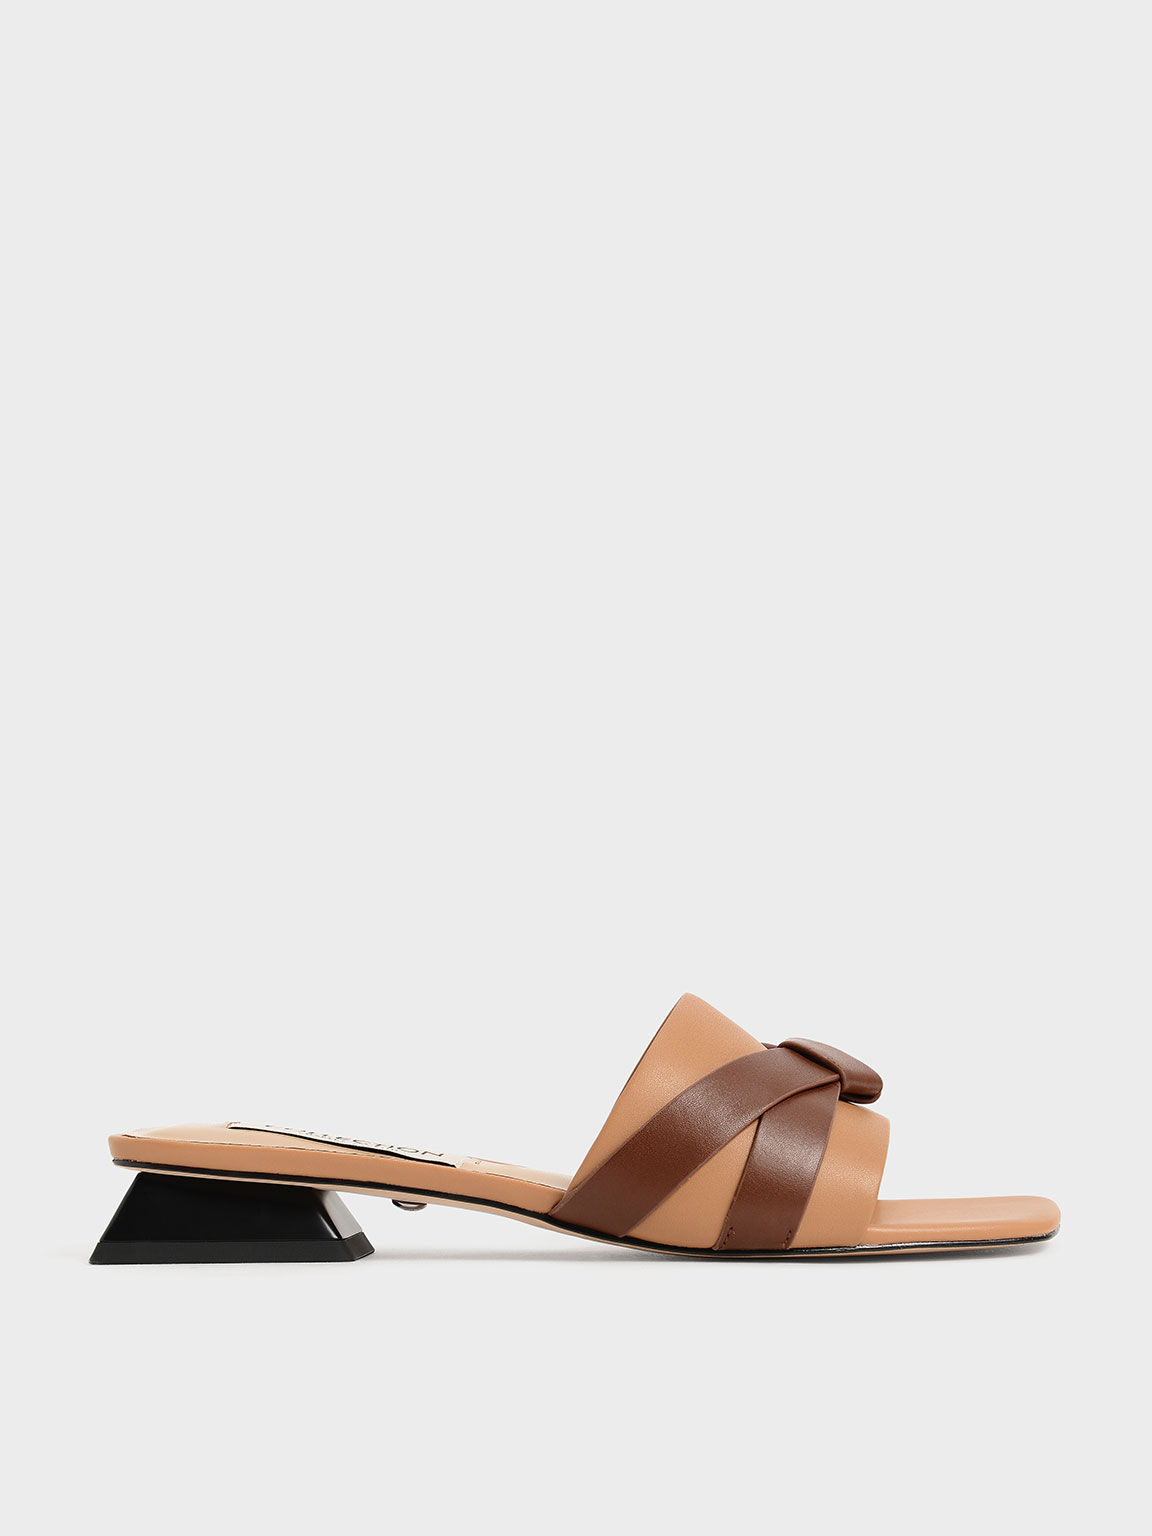 Leather Bow-Tie Trapeze Heel Mules, Caramel, hi-res